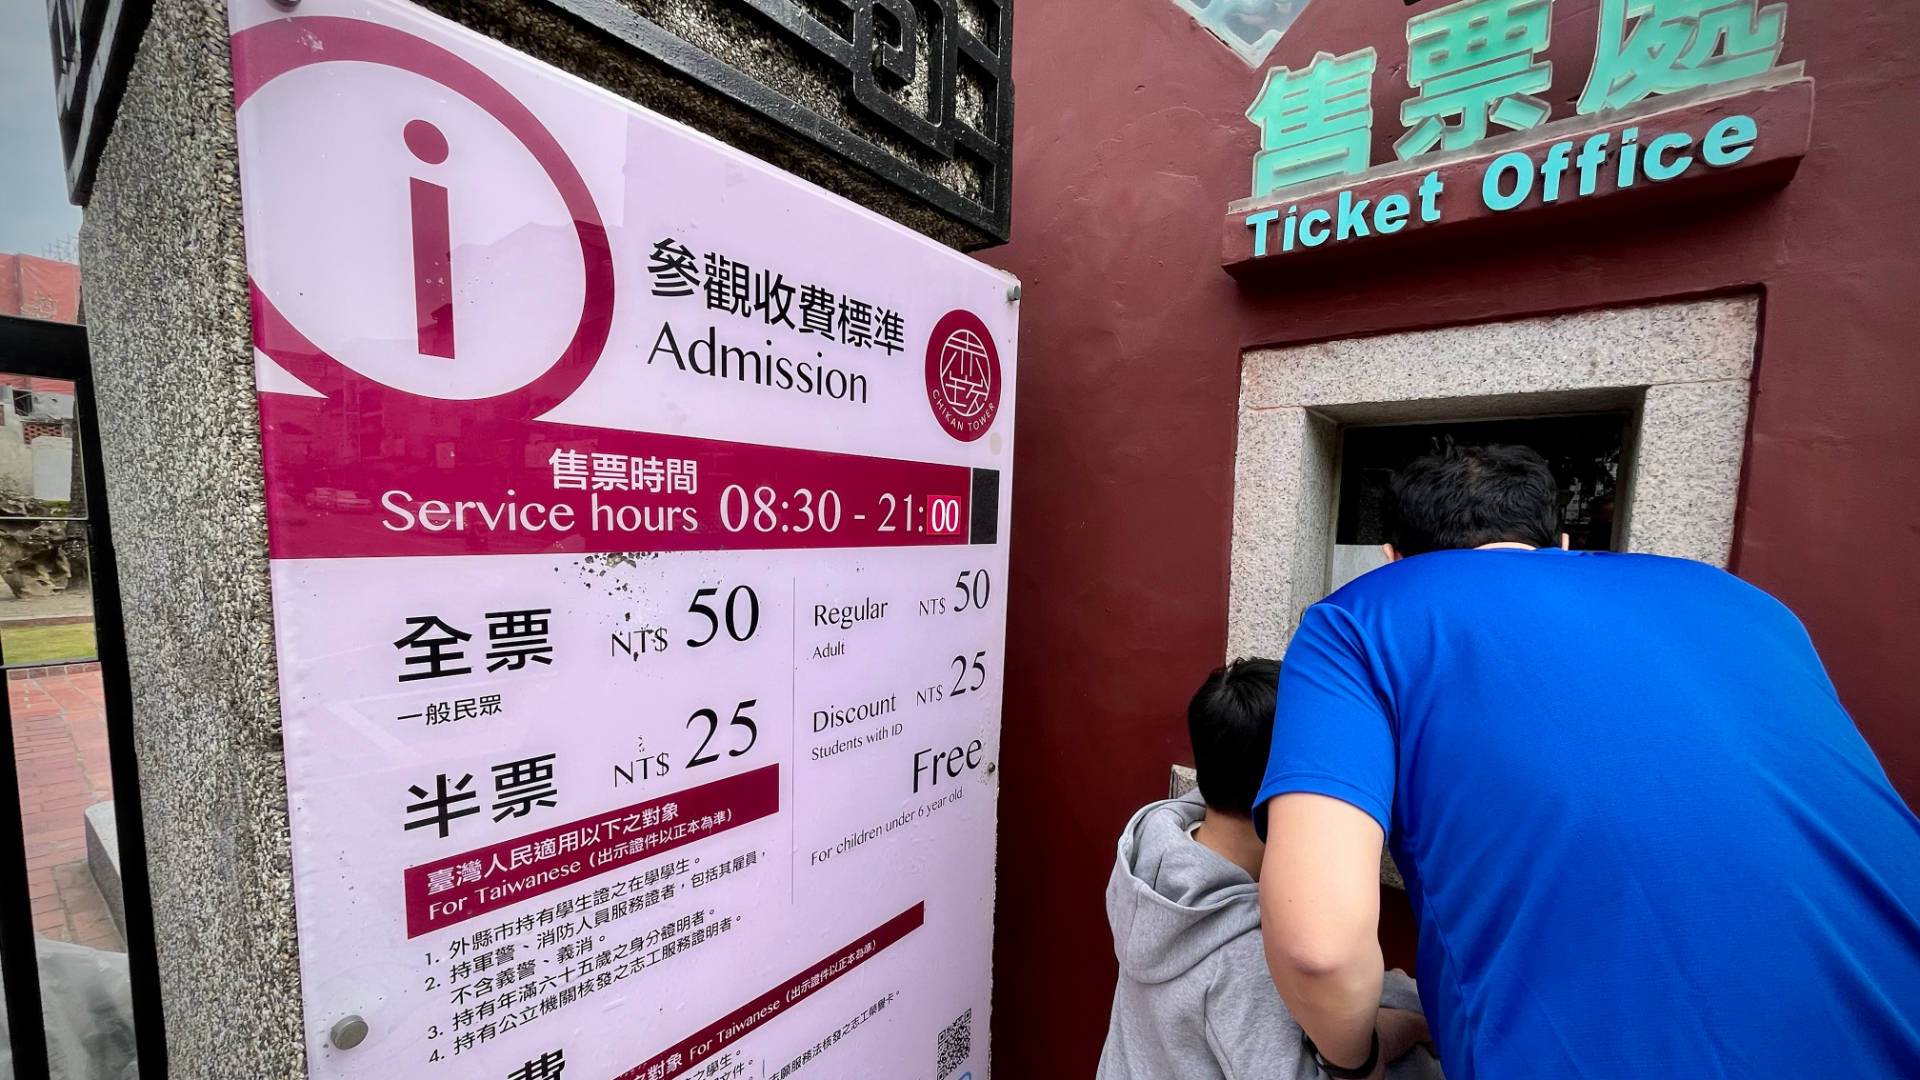 An adult and child buying tickets from a small window. Signage is in Chinese.